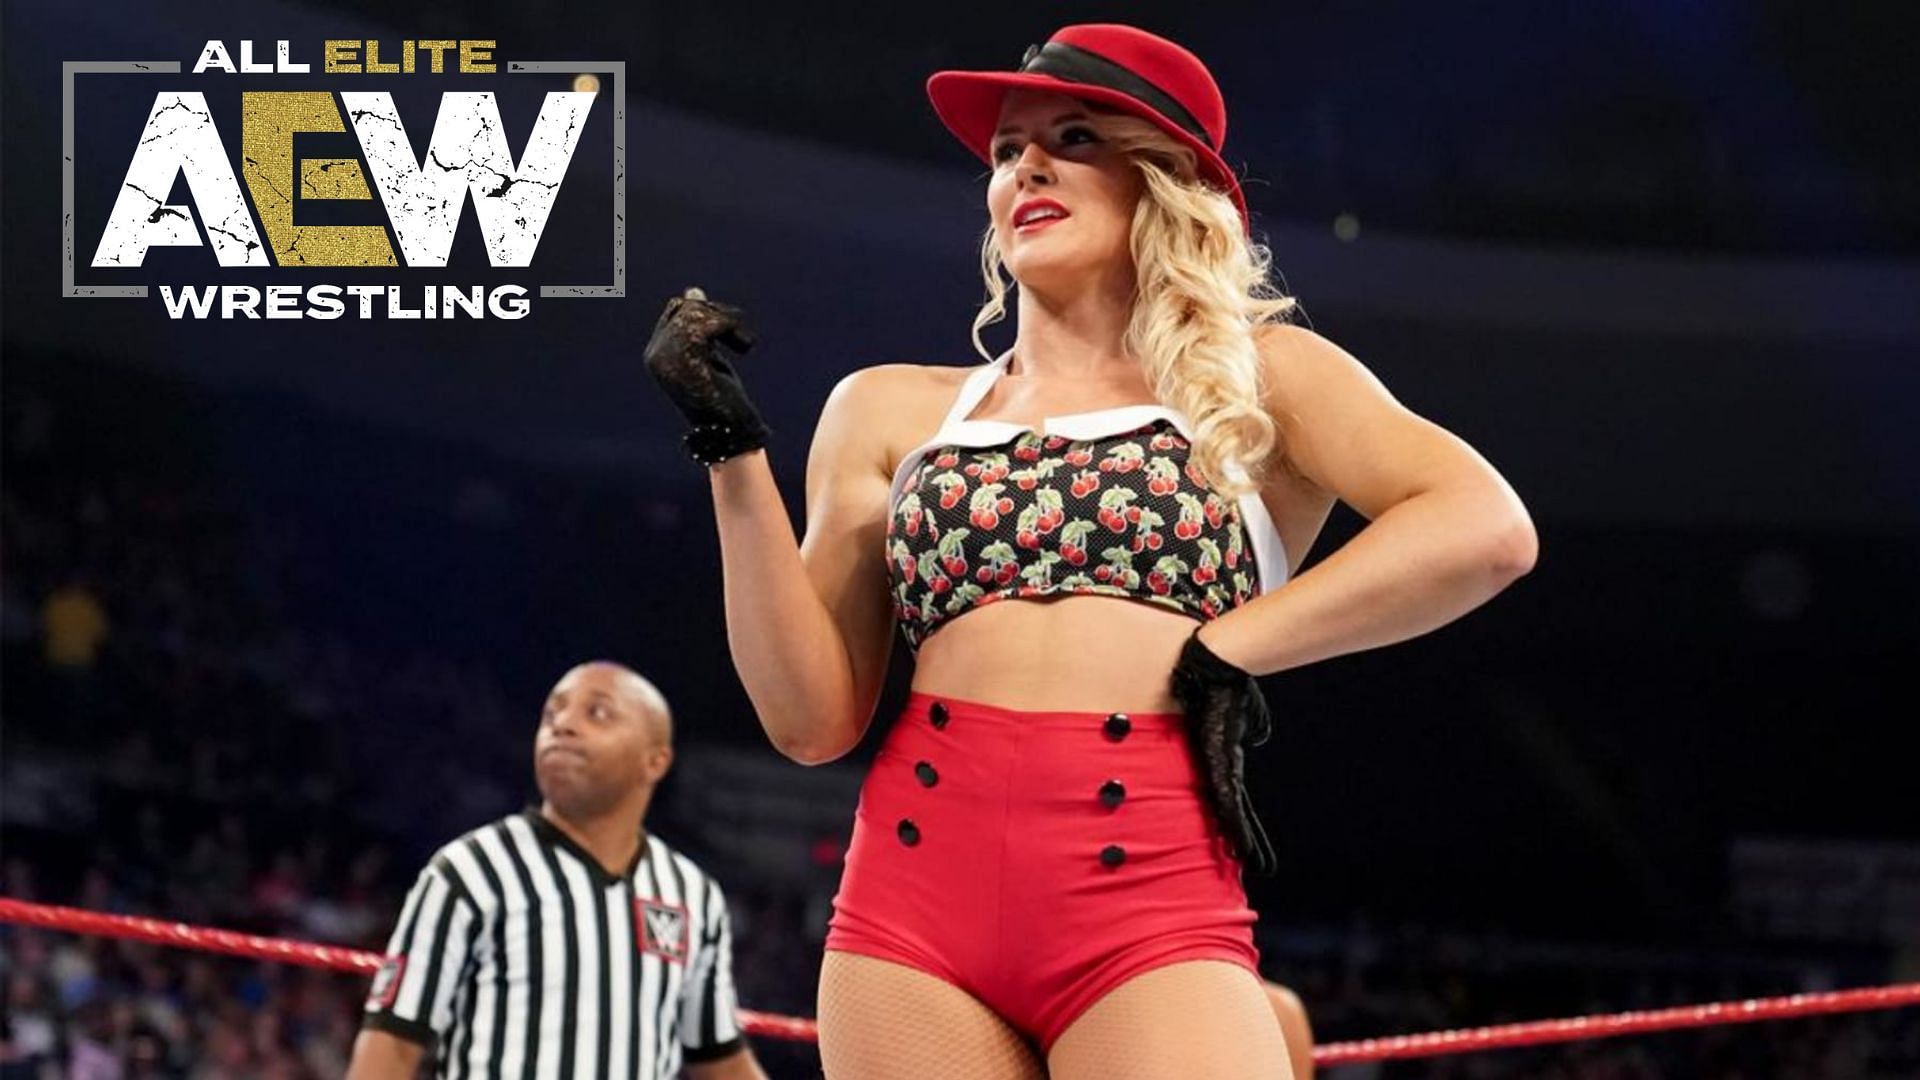 Lacey Evans recently garnered a lot of attention for a controversial post